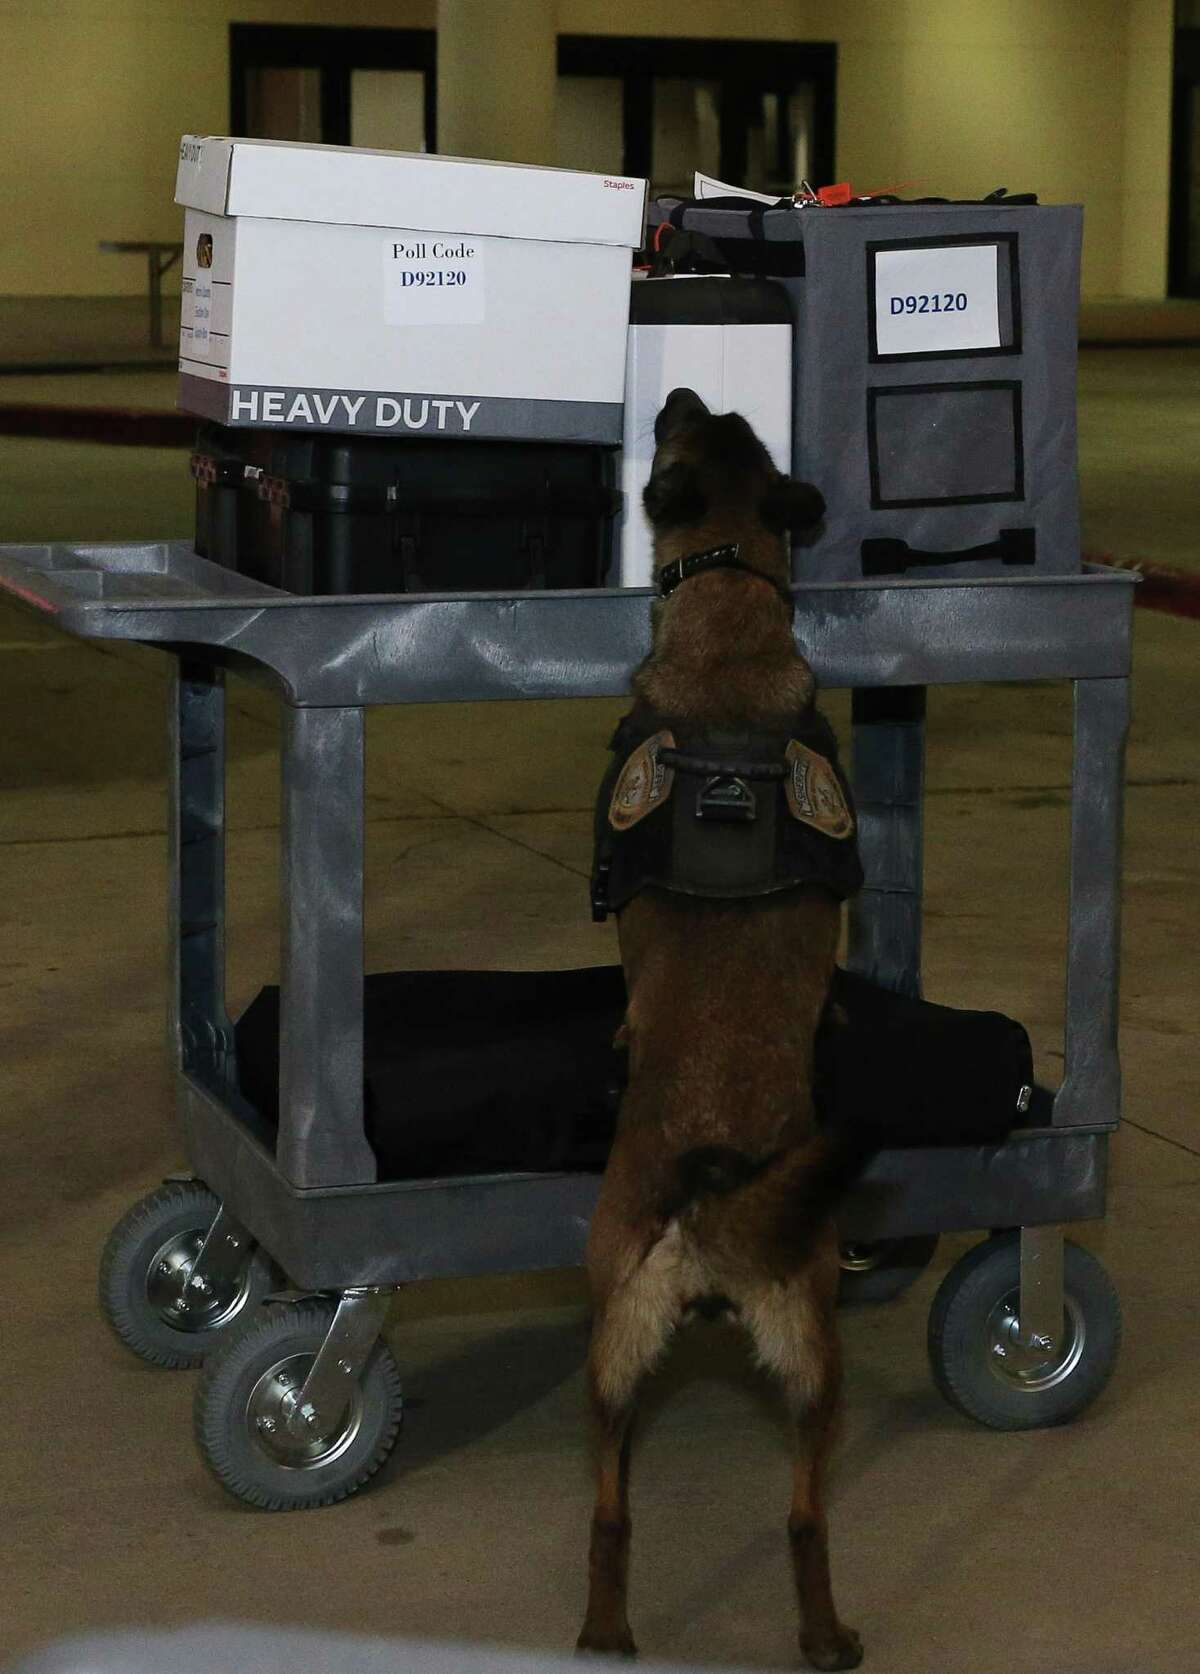 A Harris County Sheriff’s Office K-9 officer inspects returned voting equipment as it is being transported from the drop-off site to Central Count Tuesday, May 24, 2022, at NRG Arena in Houston.